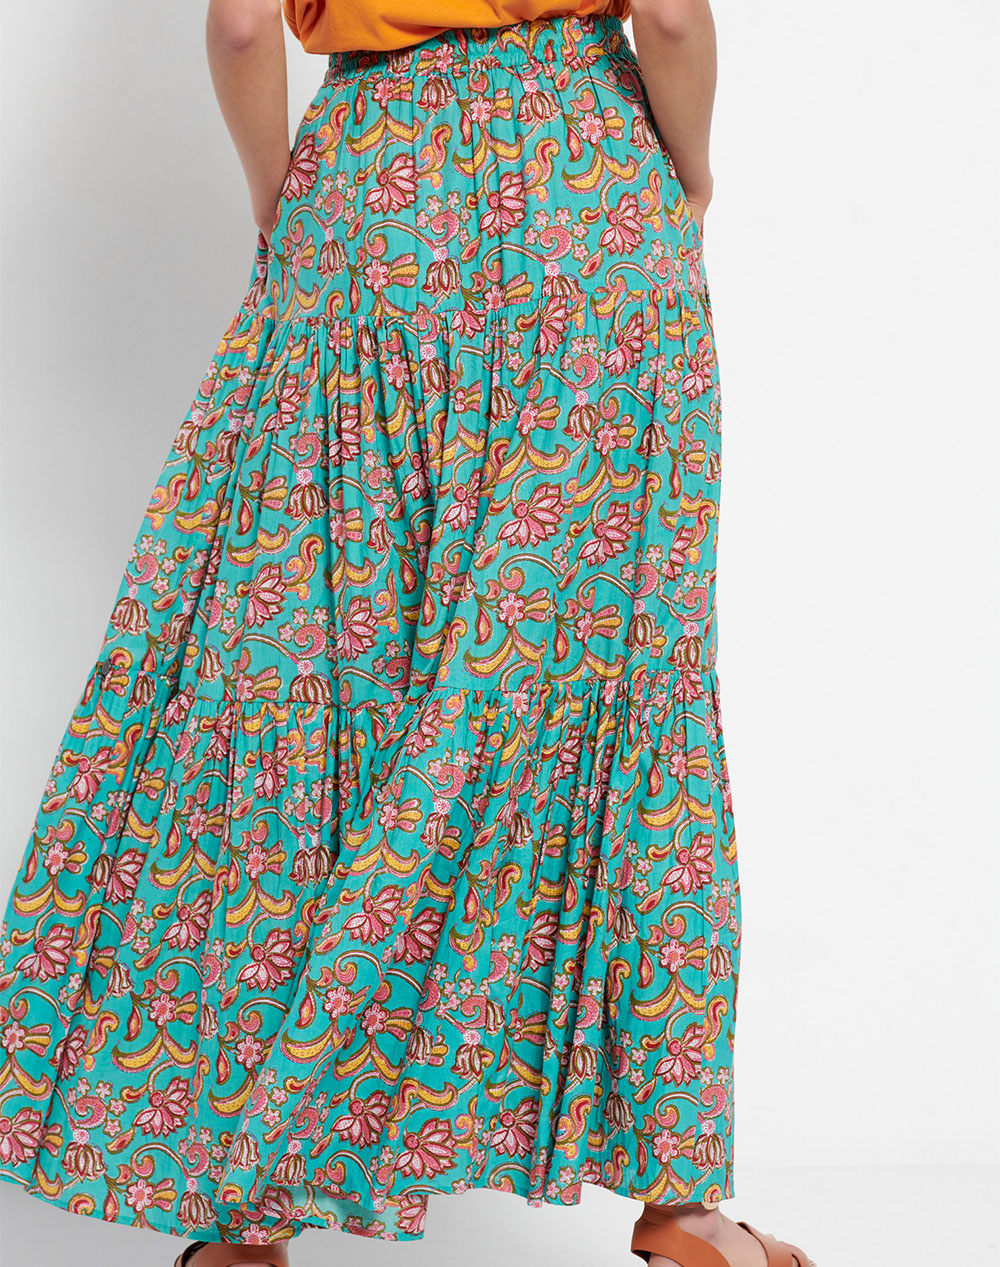 All over printed maxi skirt